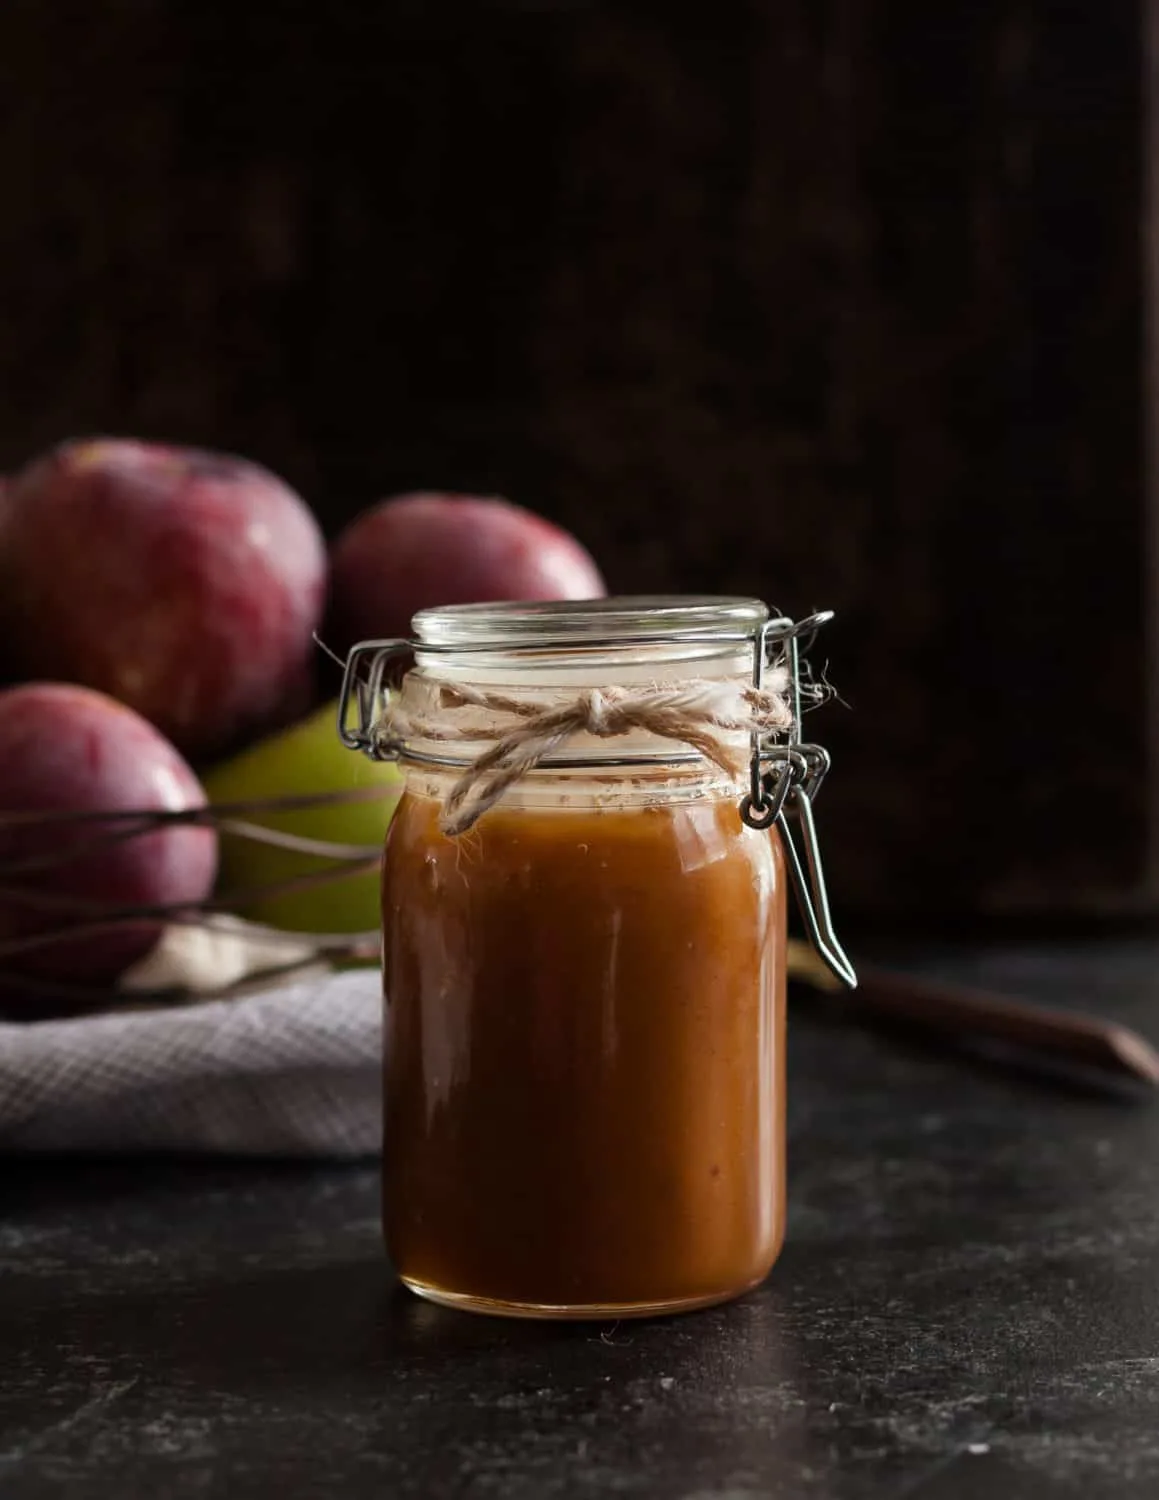 I bet you'll never guess the surprise ingredient that makes this Apple Cider Caramel Sauce a must-make fall dessert recipe! * Recipe on GoodieGodmother.com